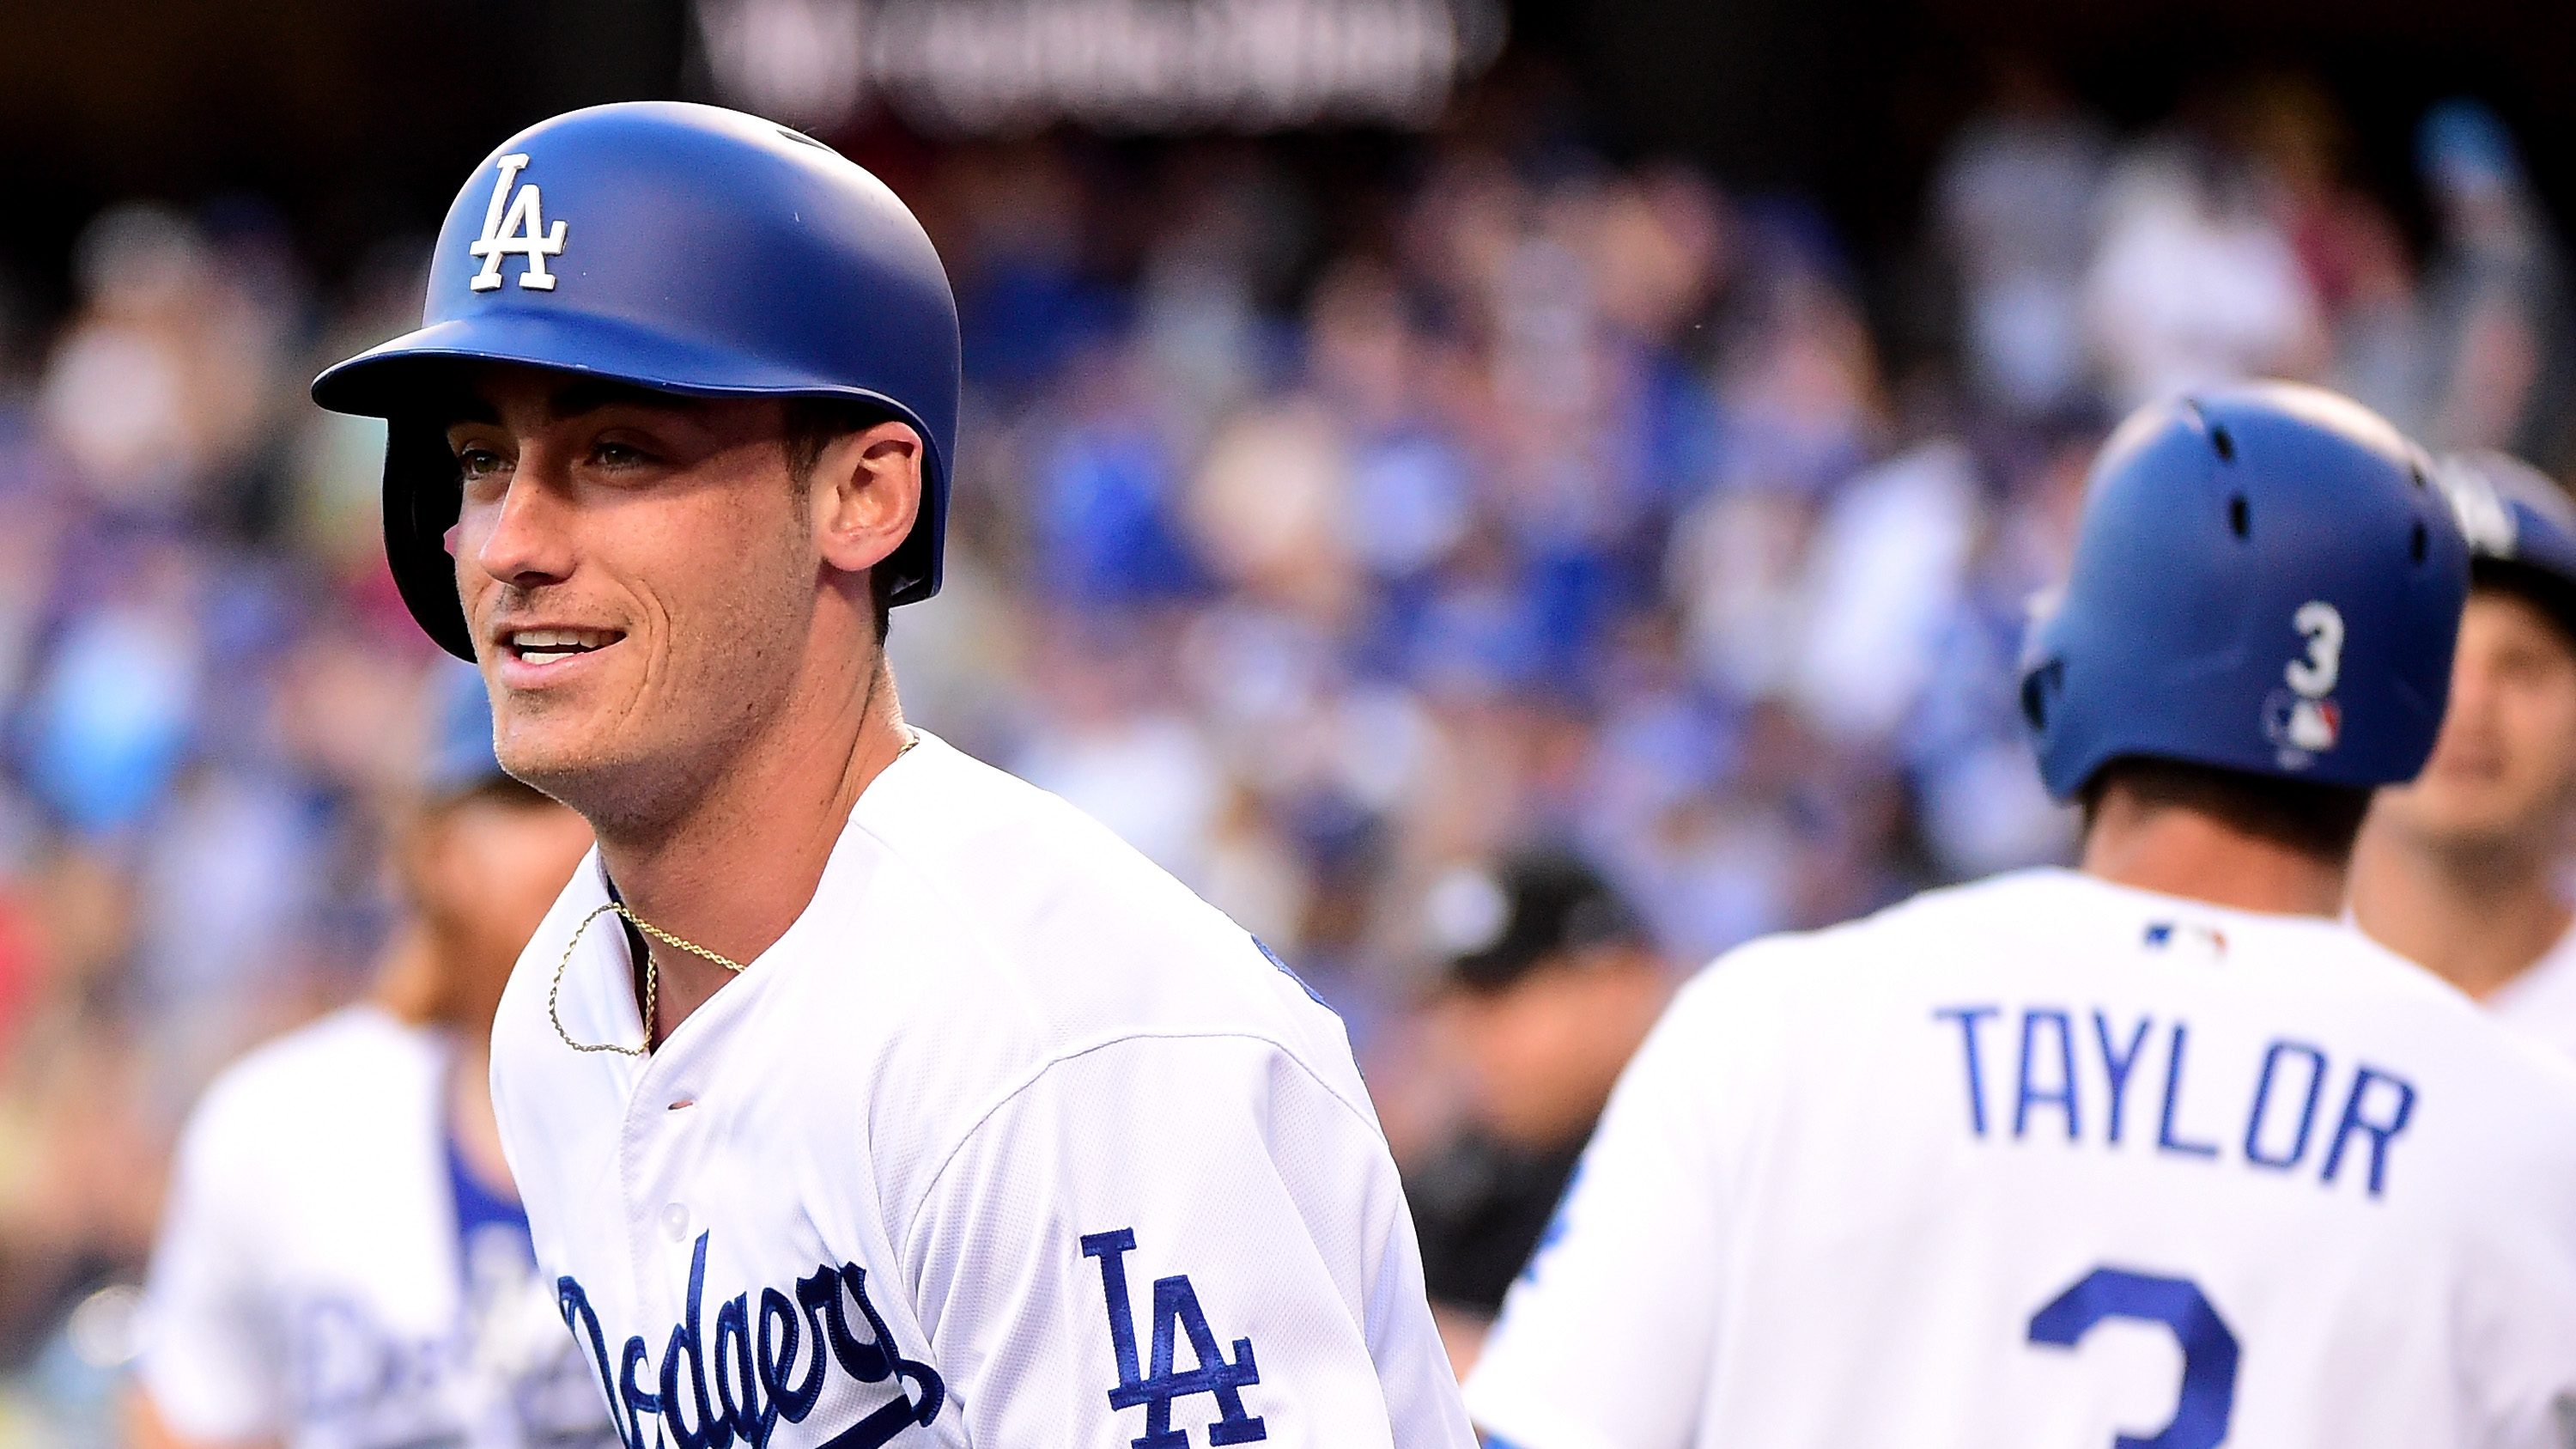 Cody Bellinger’s Parents 5 Fast Facts You Need to Know